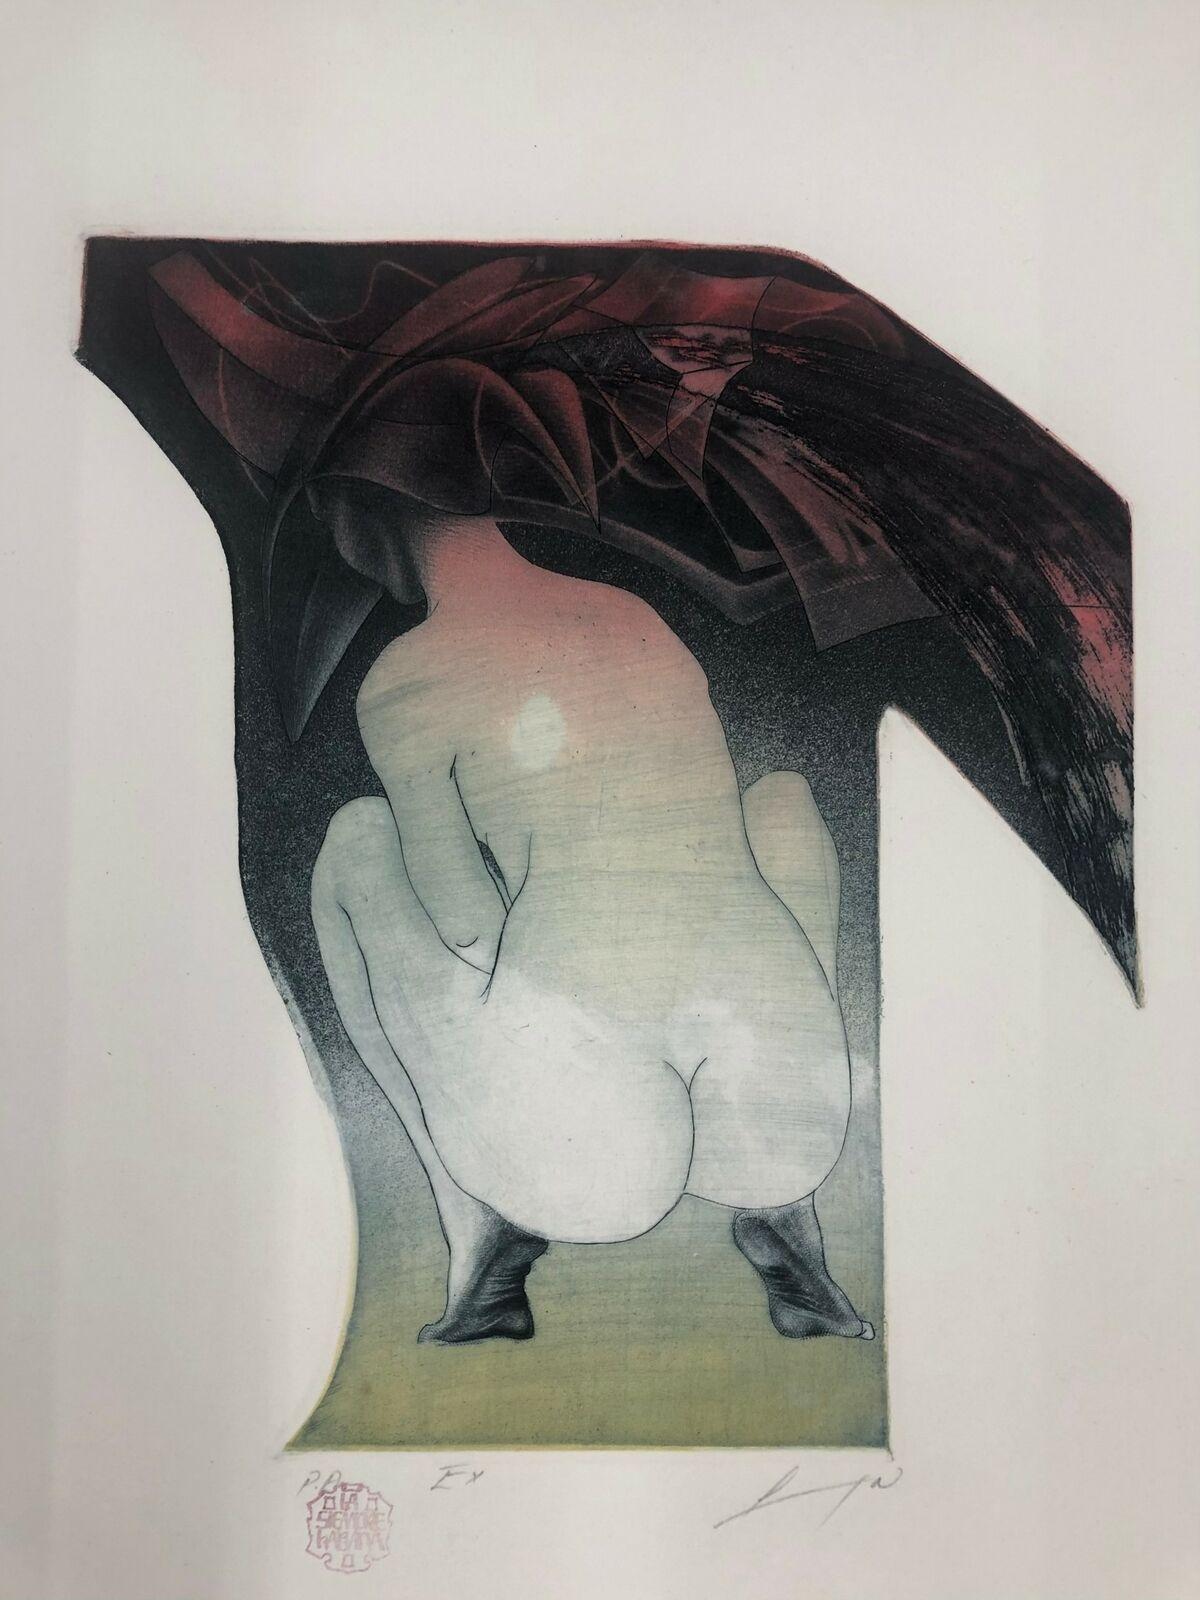 "Luis Lara (Mexico, 1972)
'Extasis', 2001
mezzotint on paper Velin Arches 300 g.
17.4 x 15.8 in. (44 x 40 cm.)
Edition of 3
ID: LAL-101"